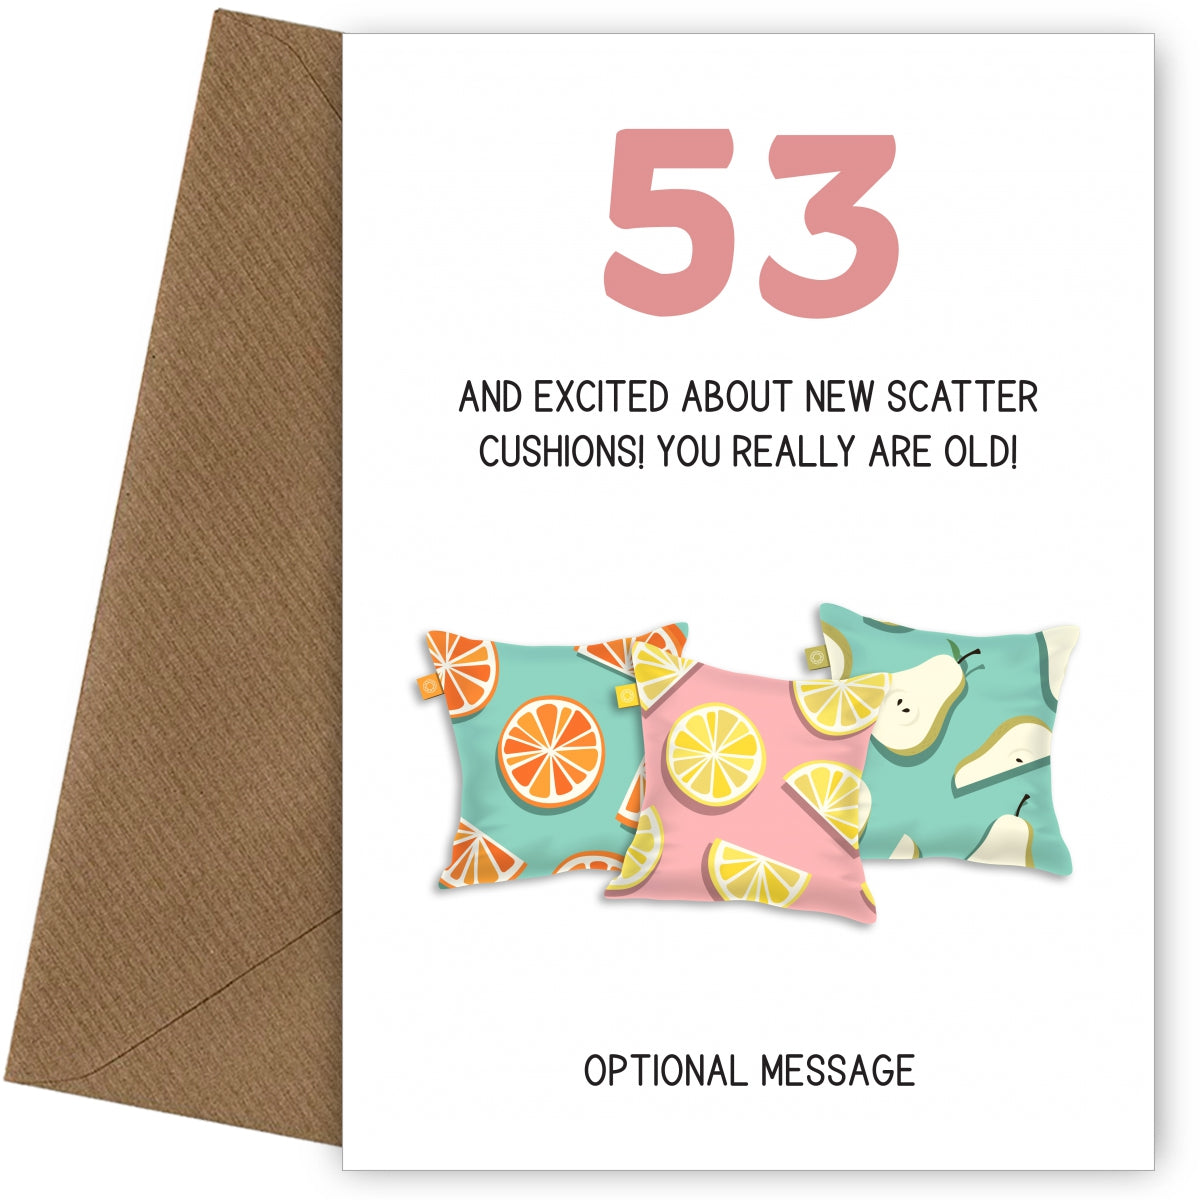 Happy 53rd Birthday Card - Excited About Scatter Cushions!